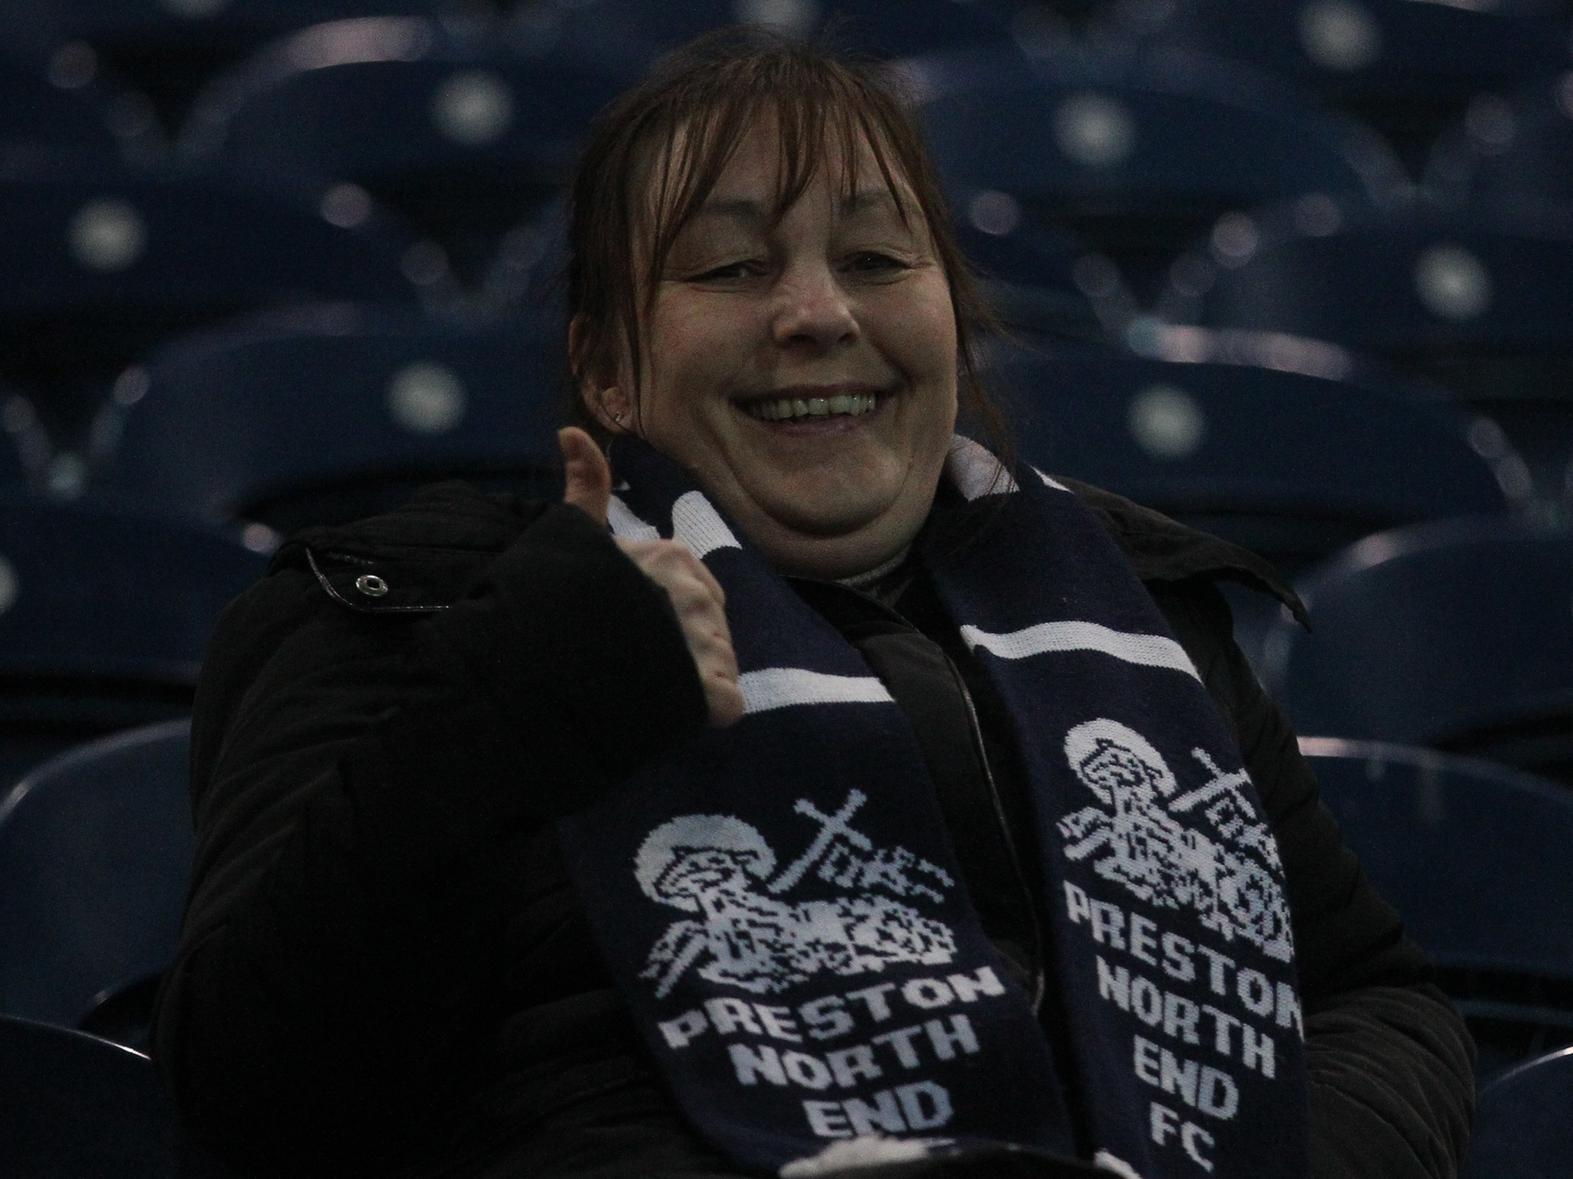 This fan is smiling ahead of the game, wearing a scarf from the original 'scarf game' back in May 2007.